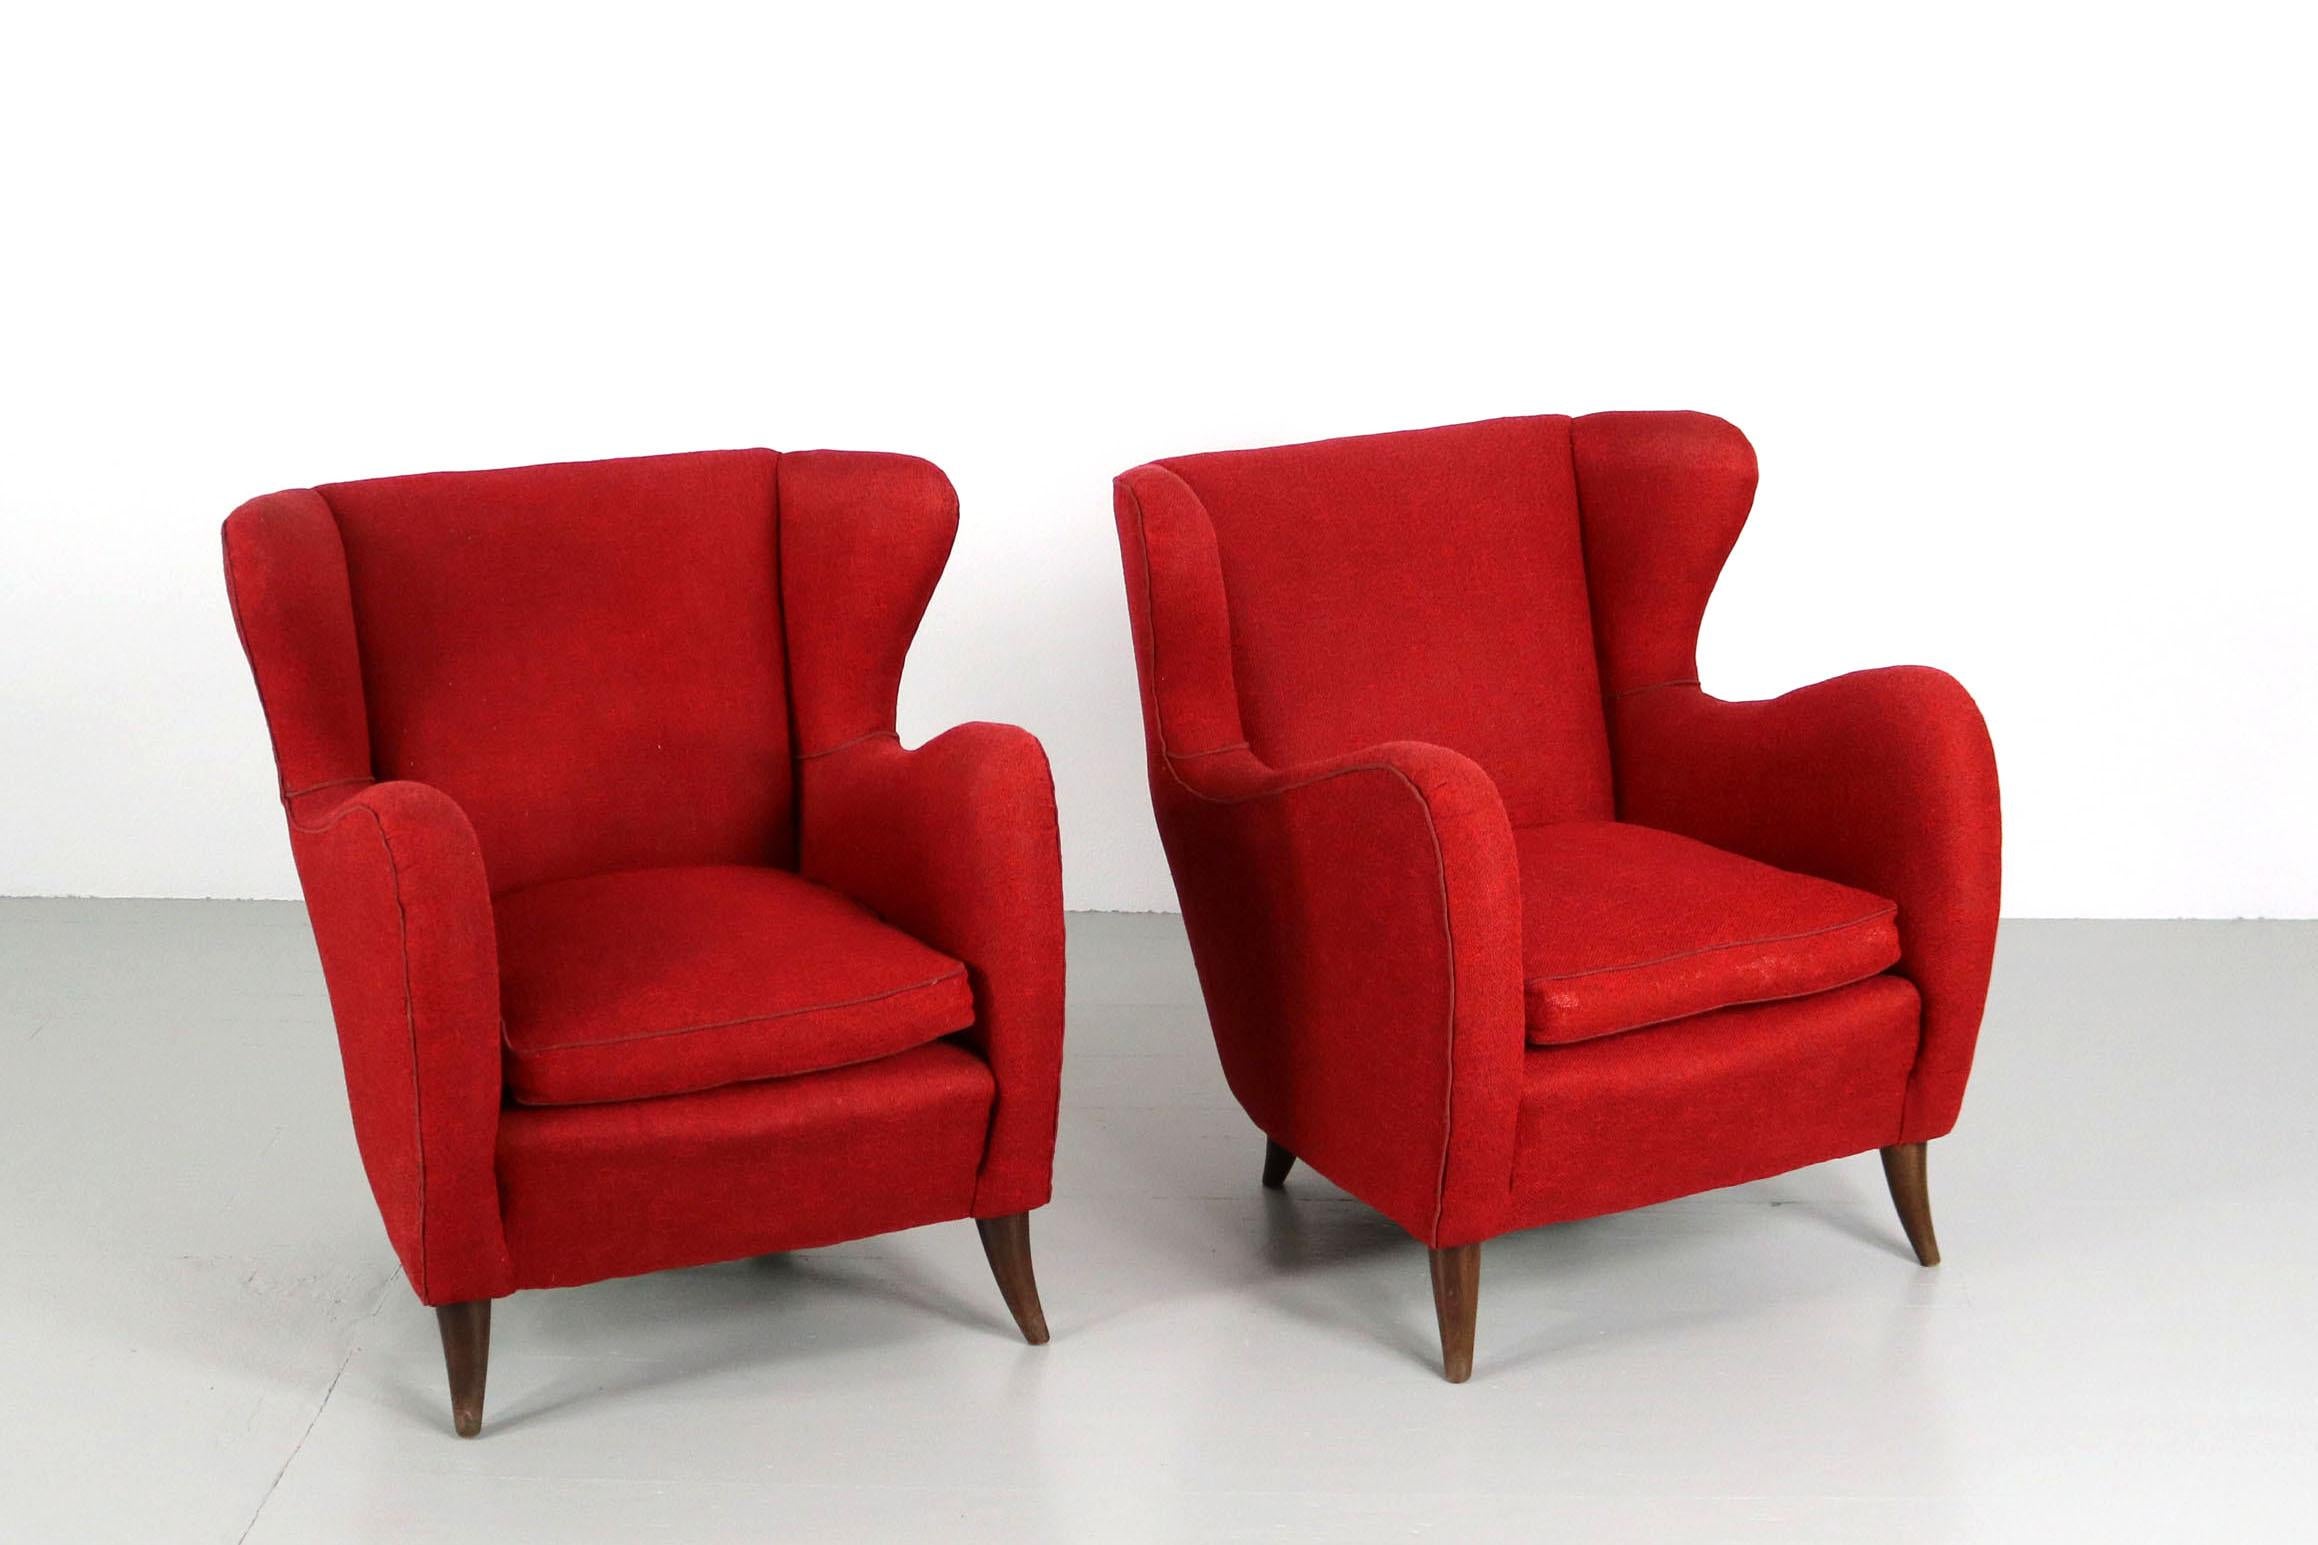 Melchiorre Bega Italian Pair of Armchairs, 1950s For Sale 14